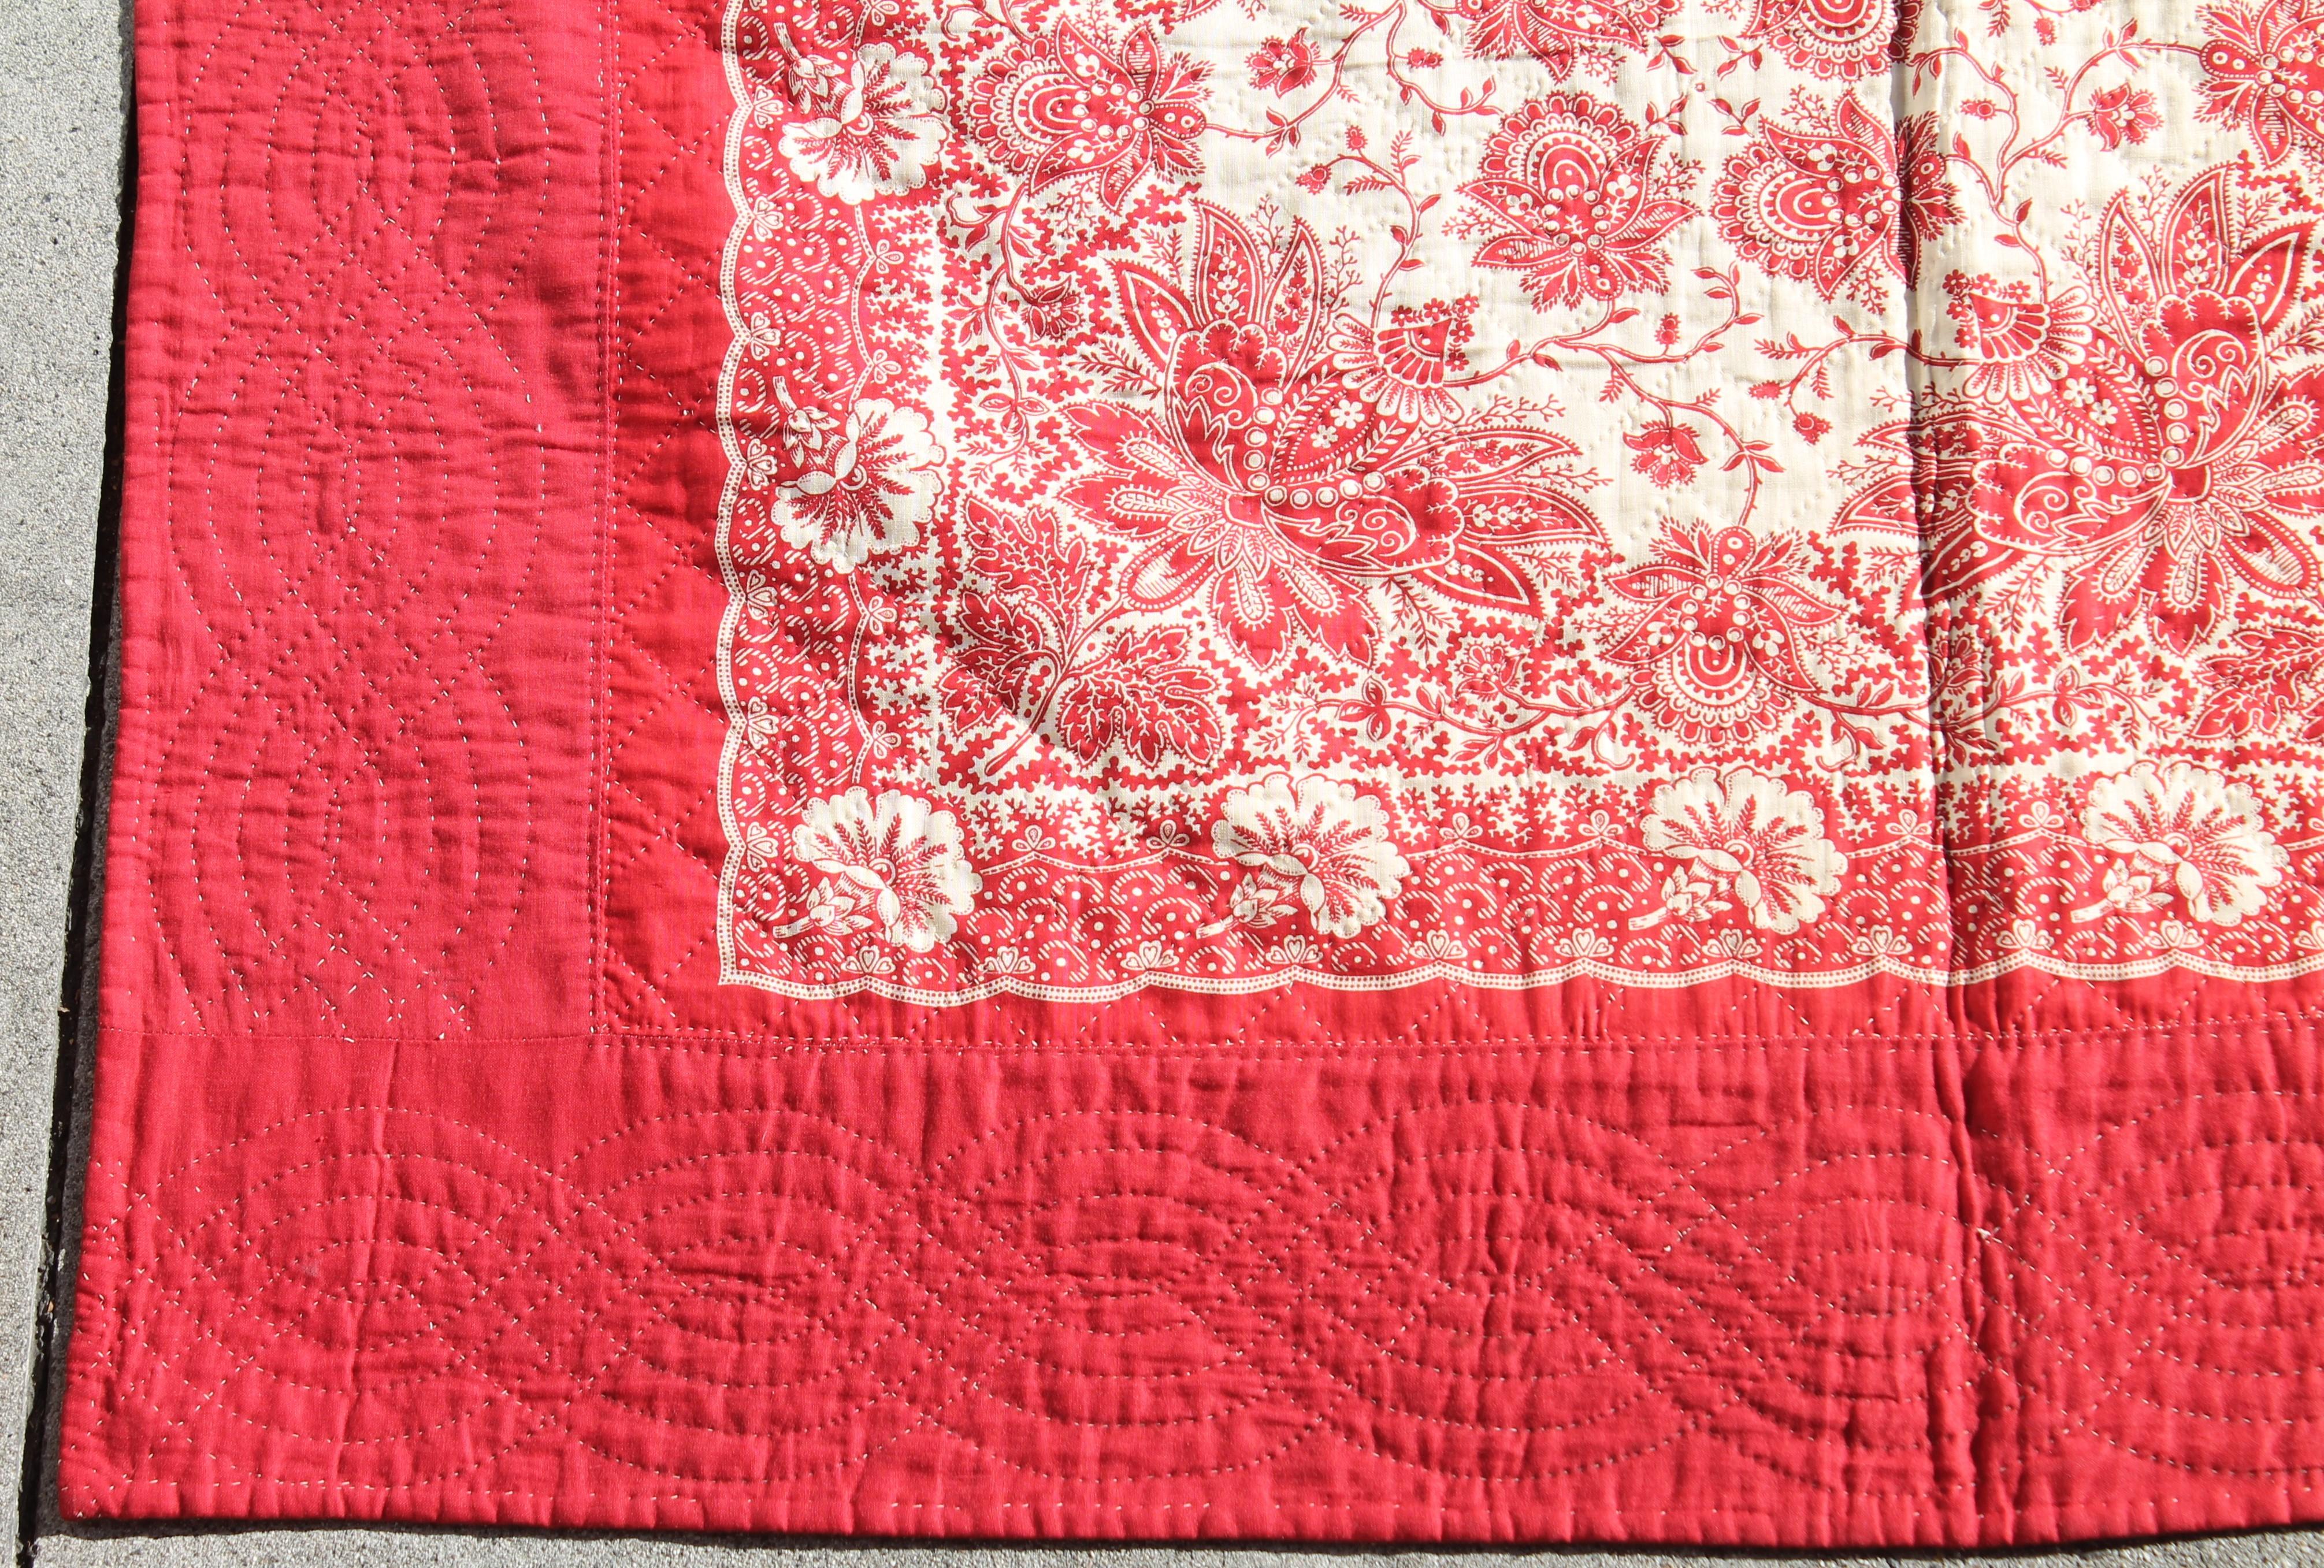 Hand-Crafted Antique Quilt, 19th Century Bandana Quilt